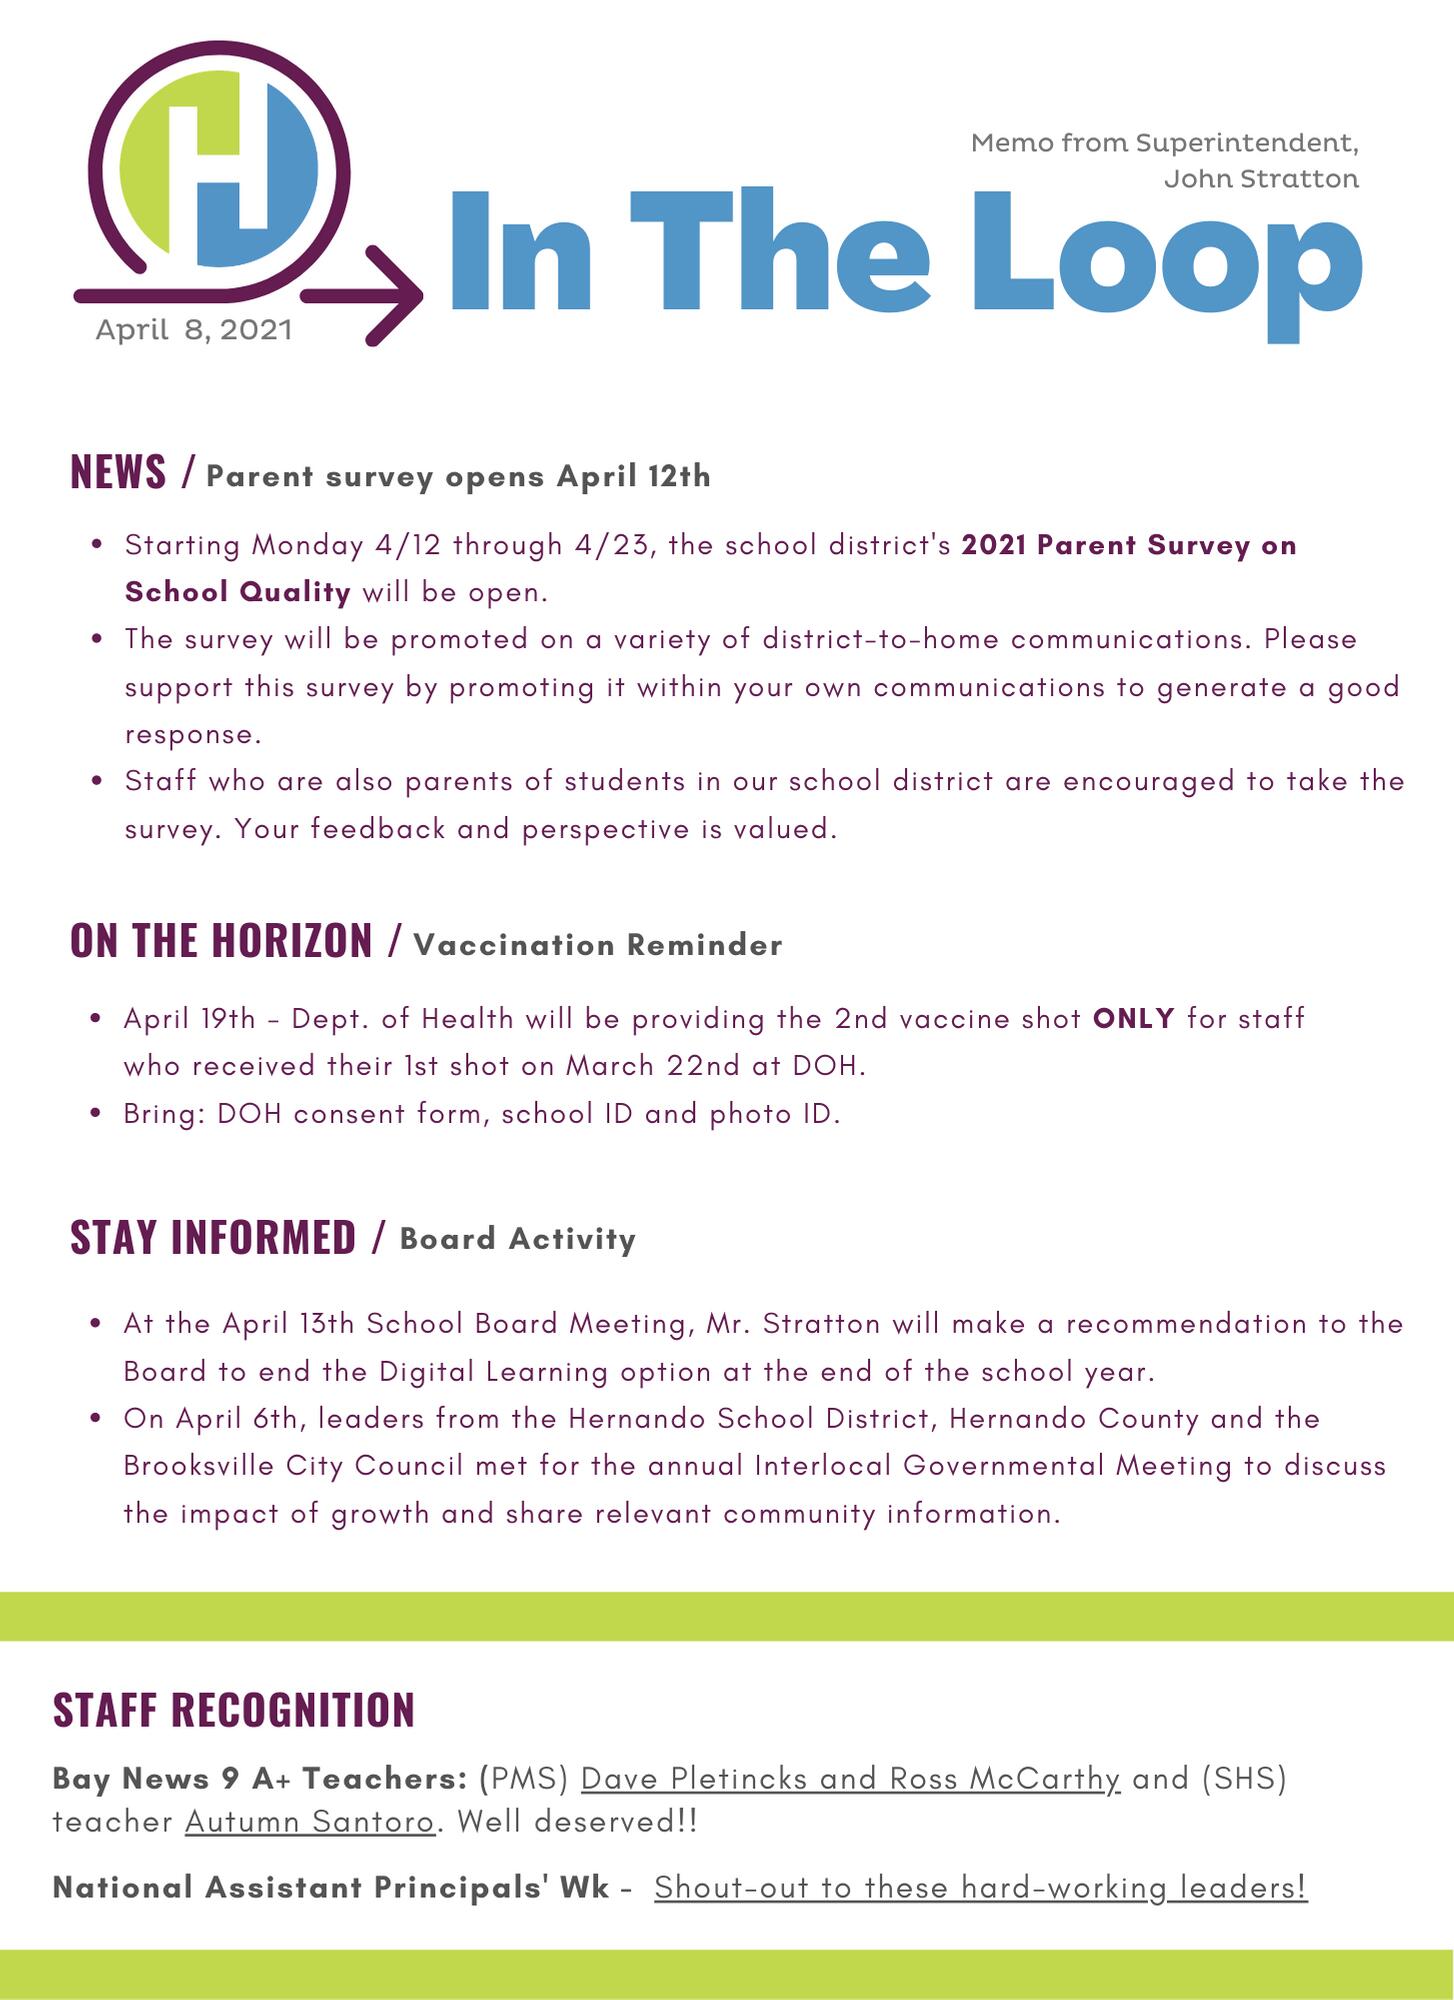 In the loop - April 8 newsletter